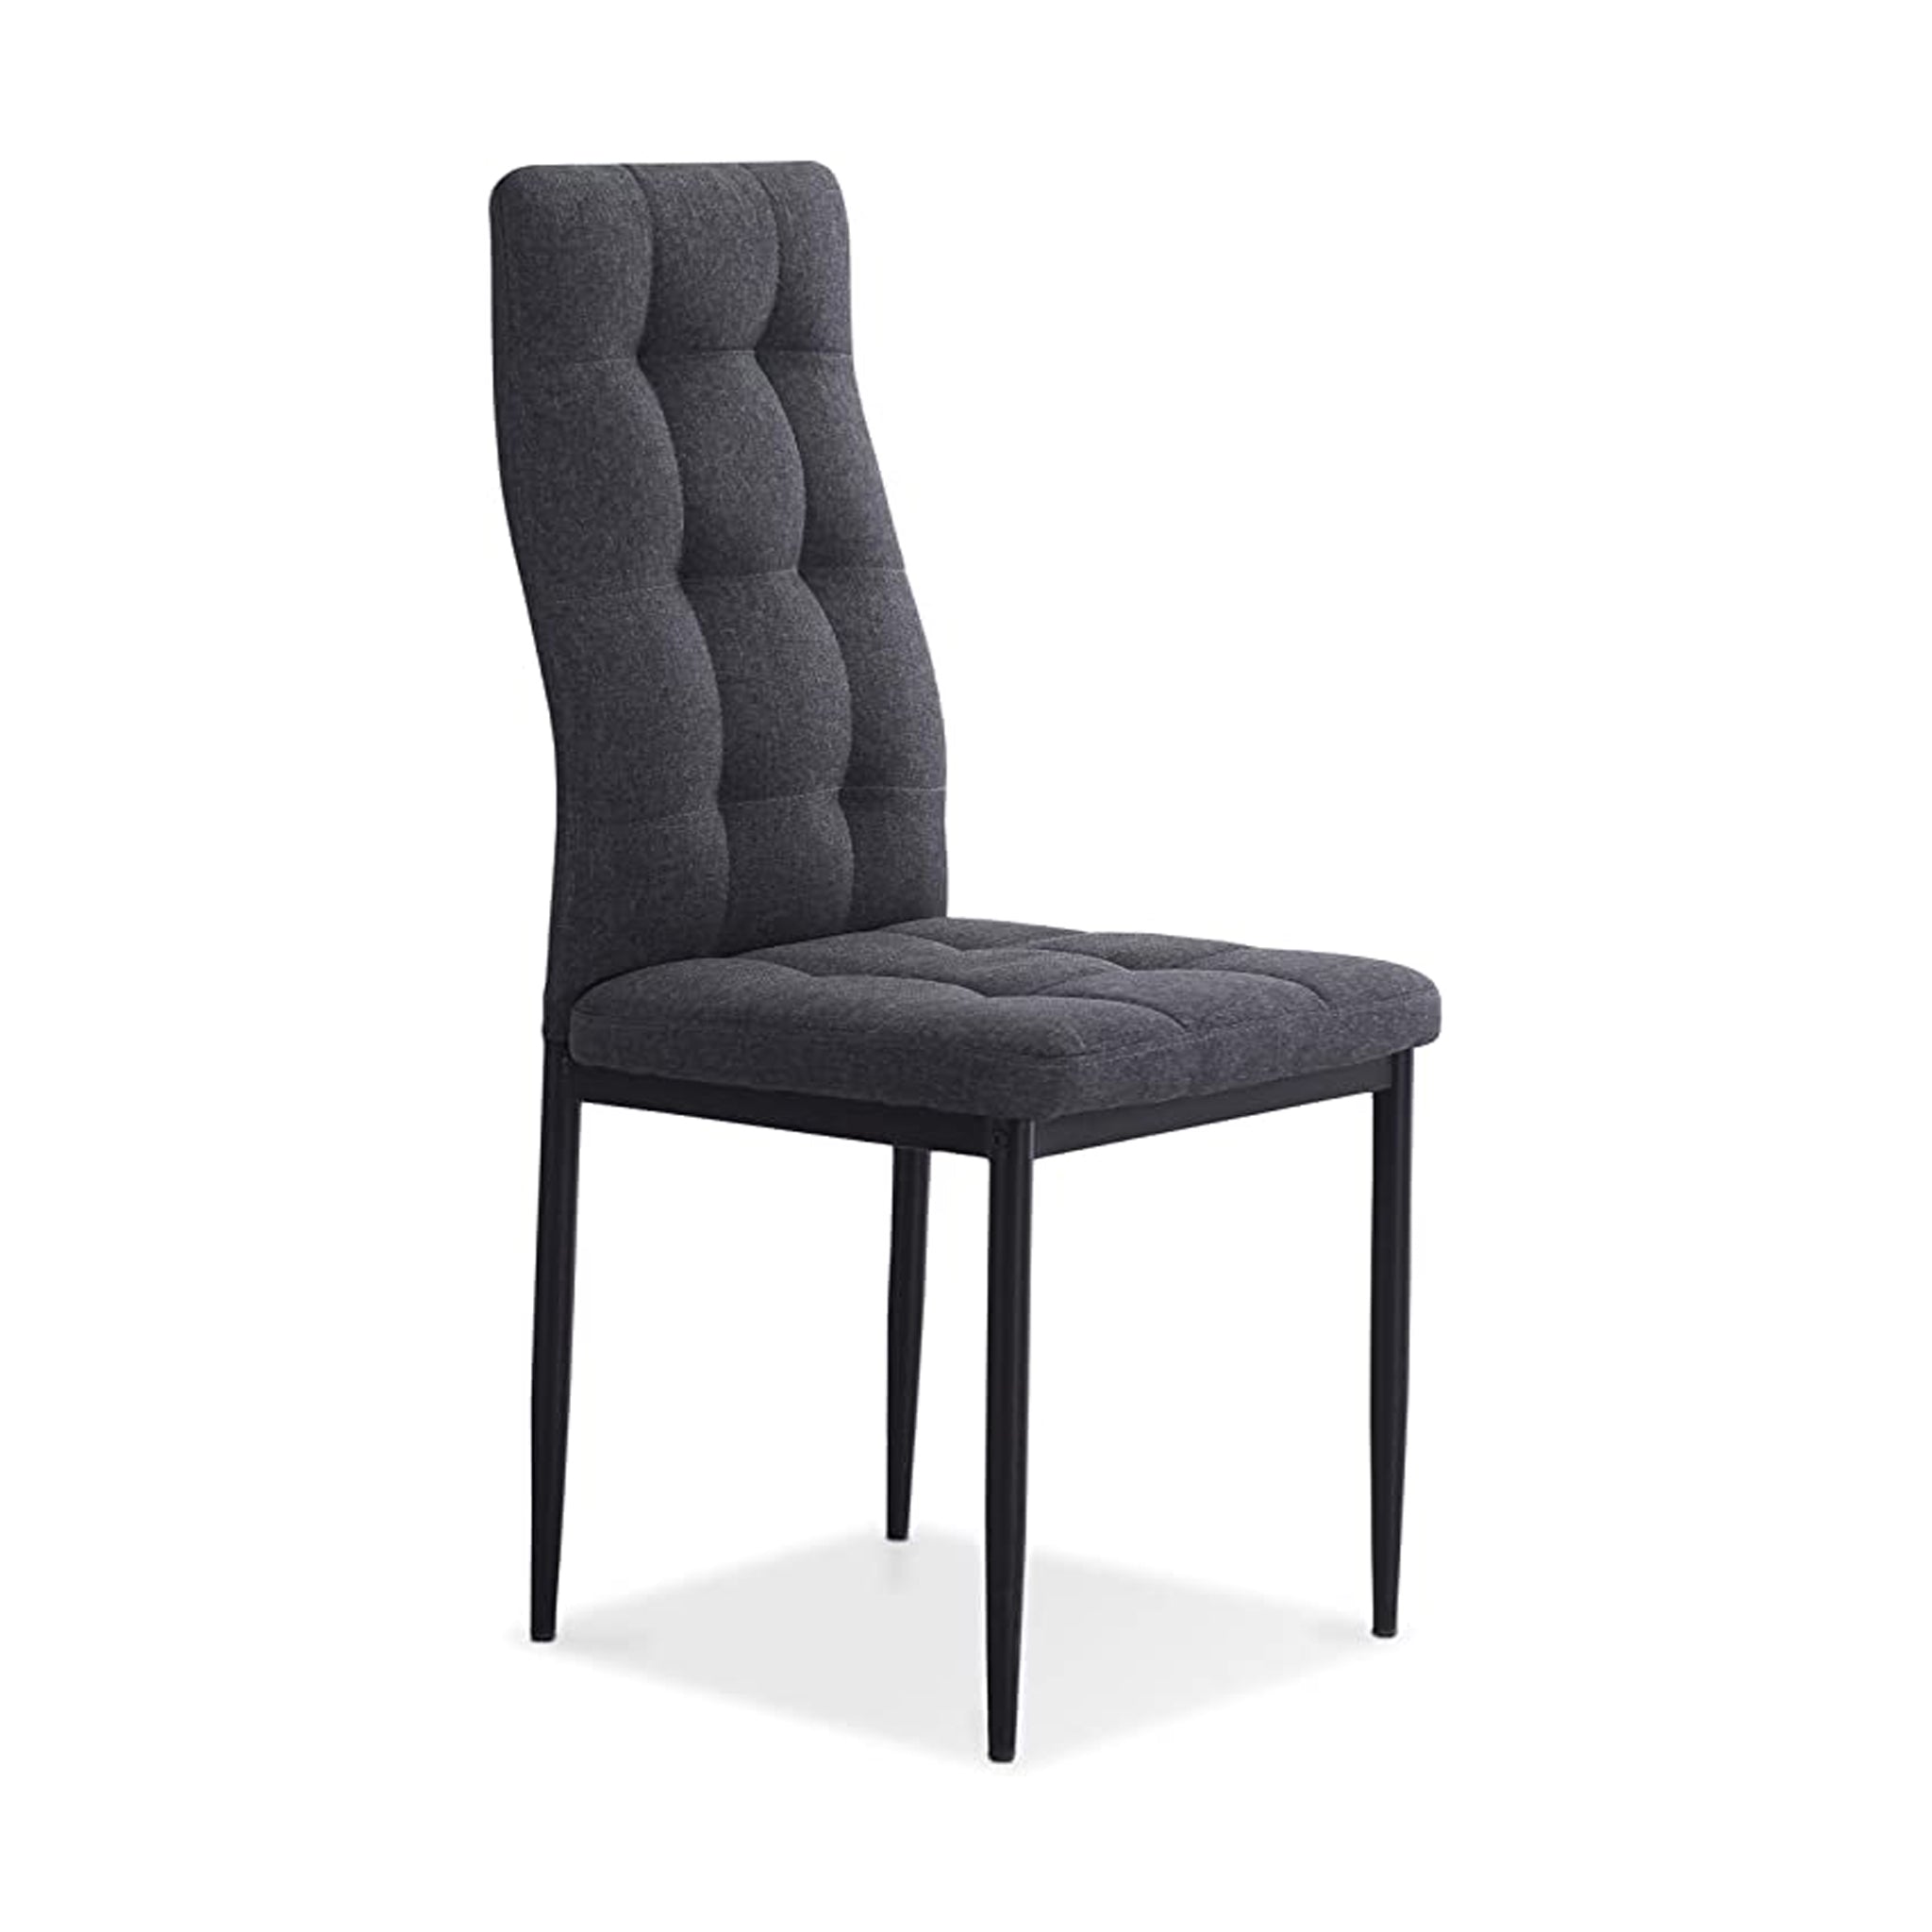 Pack of 6 Zuni upholstered chairs-Grey and Black